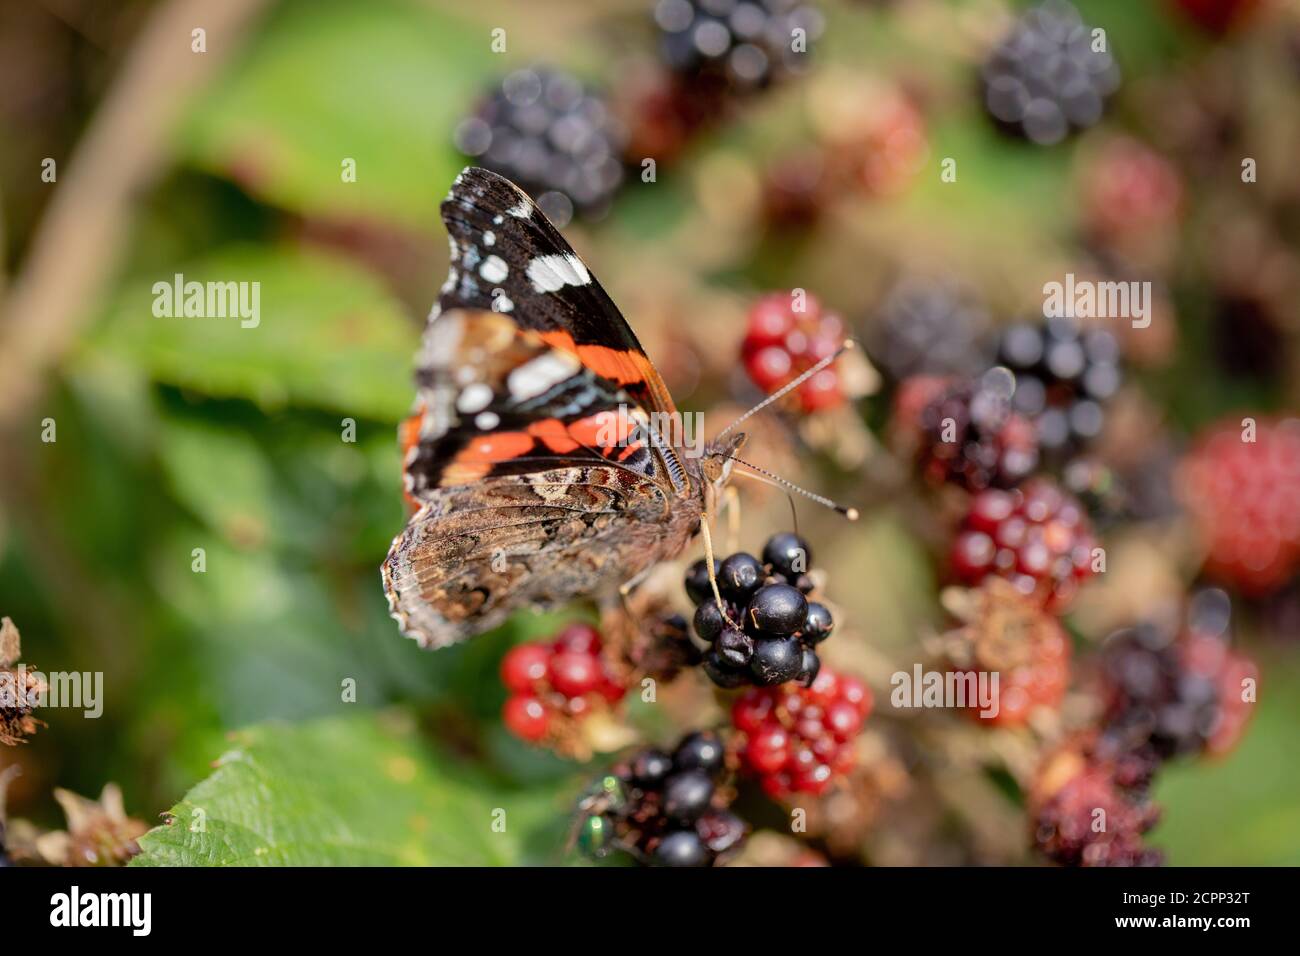 Red Admiral Butterfly (Vanessa atalanta). Feeding from over ripe Blackberries (Rubus fruticosus), with wings partially open. Stock Photo